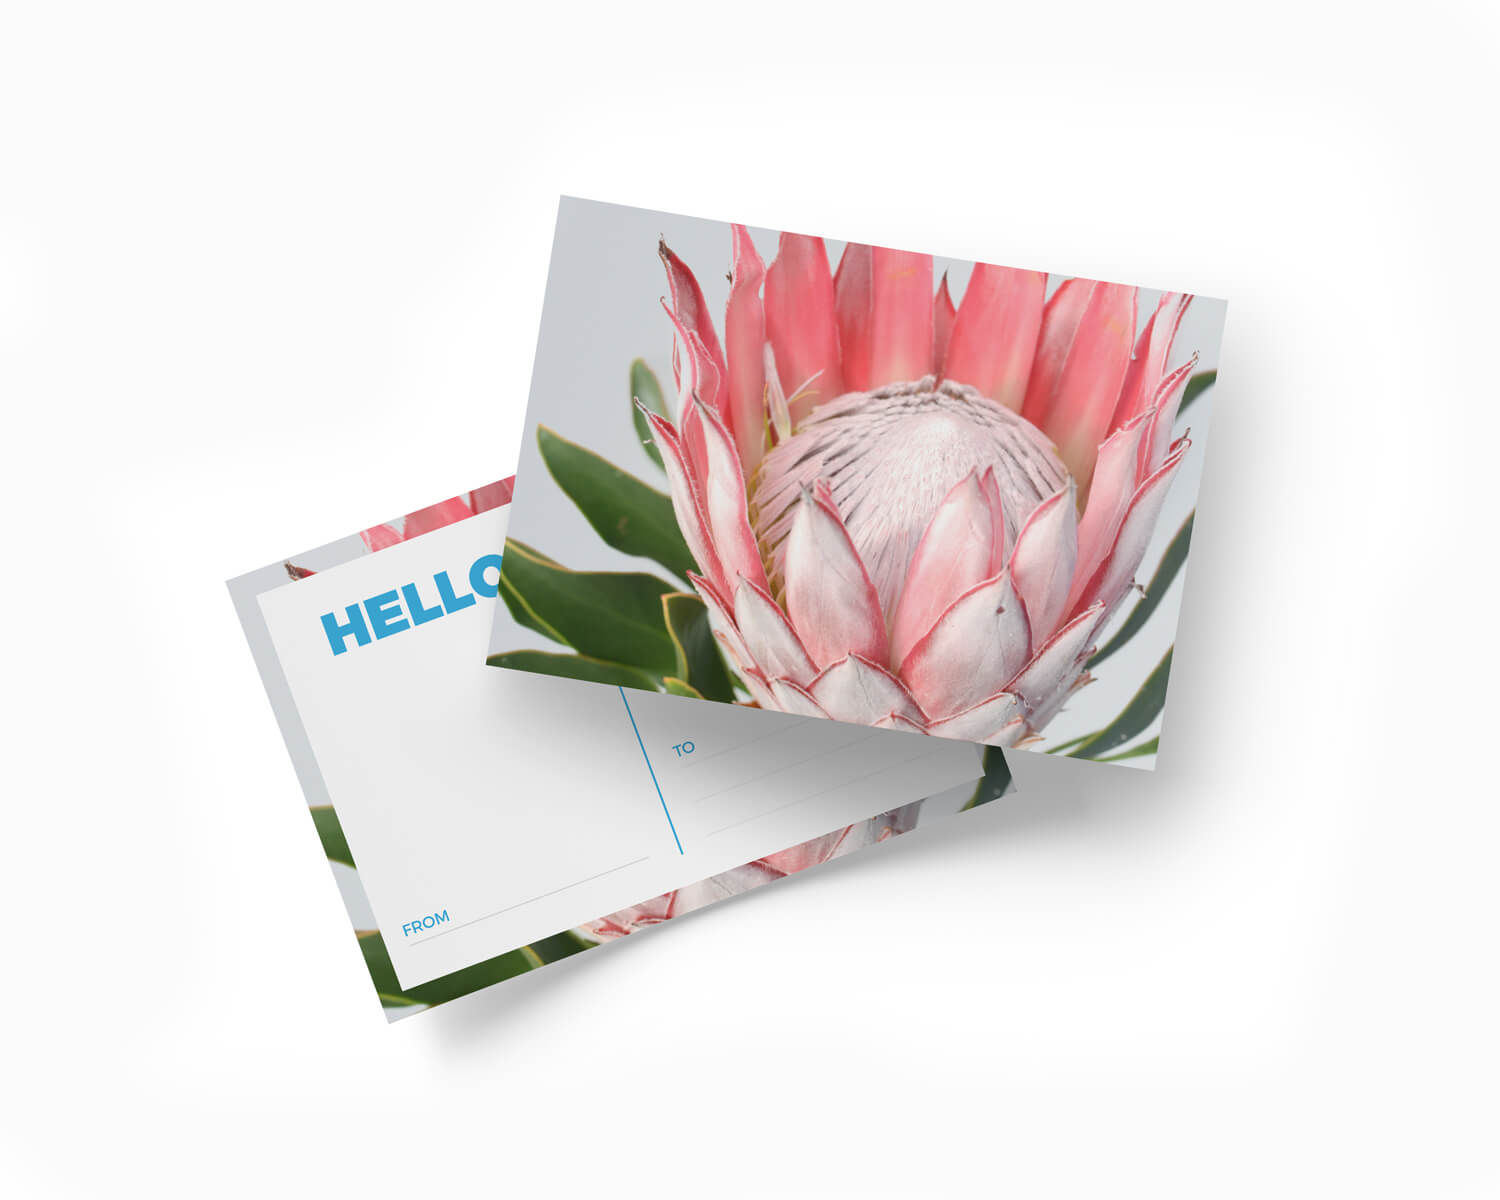 Printed postcard with a protea